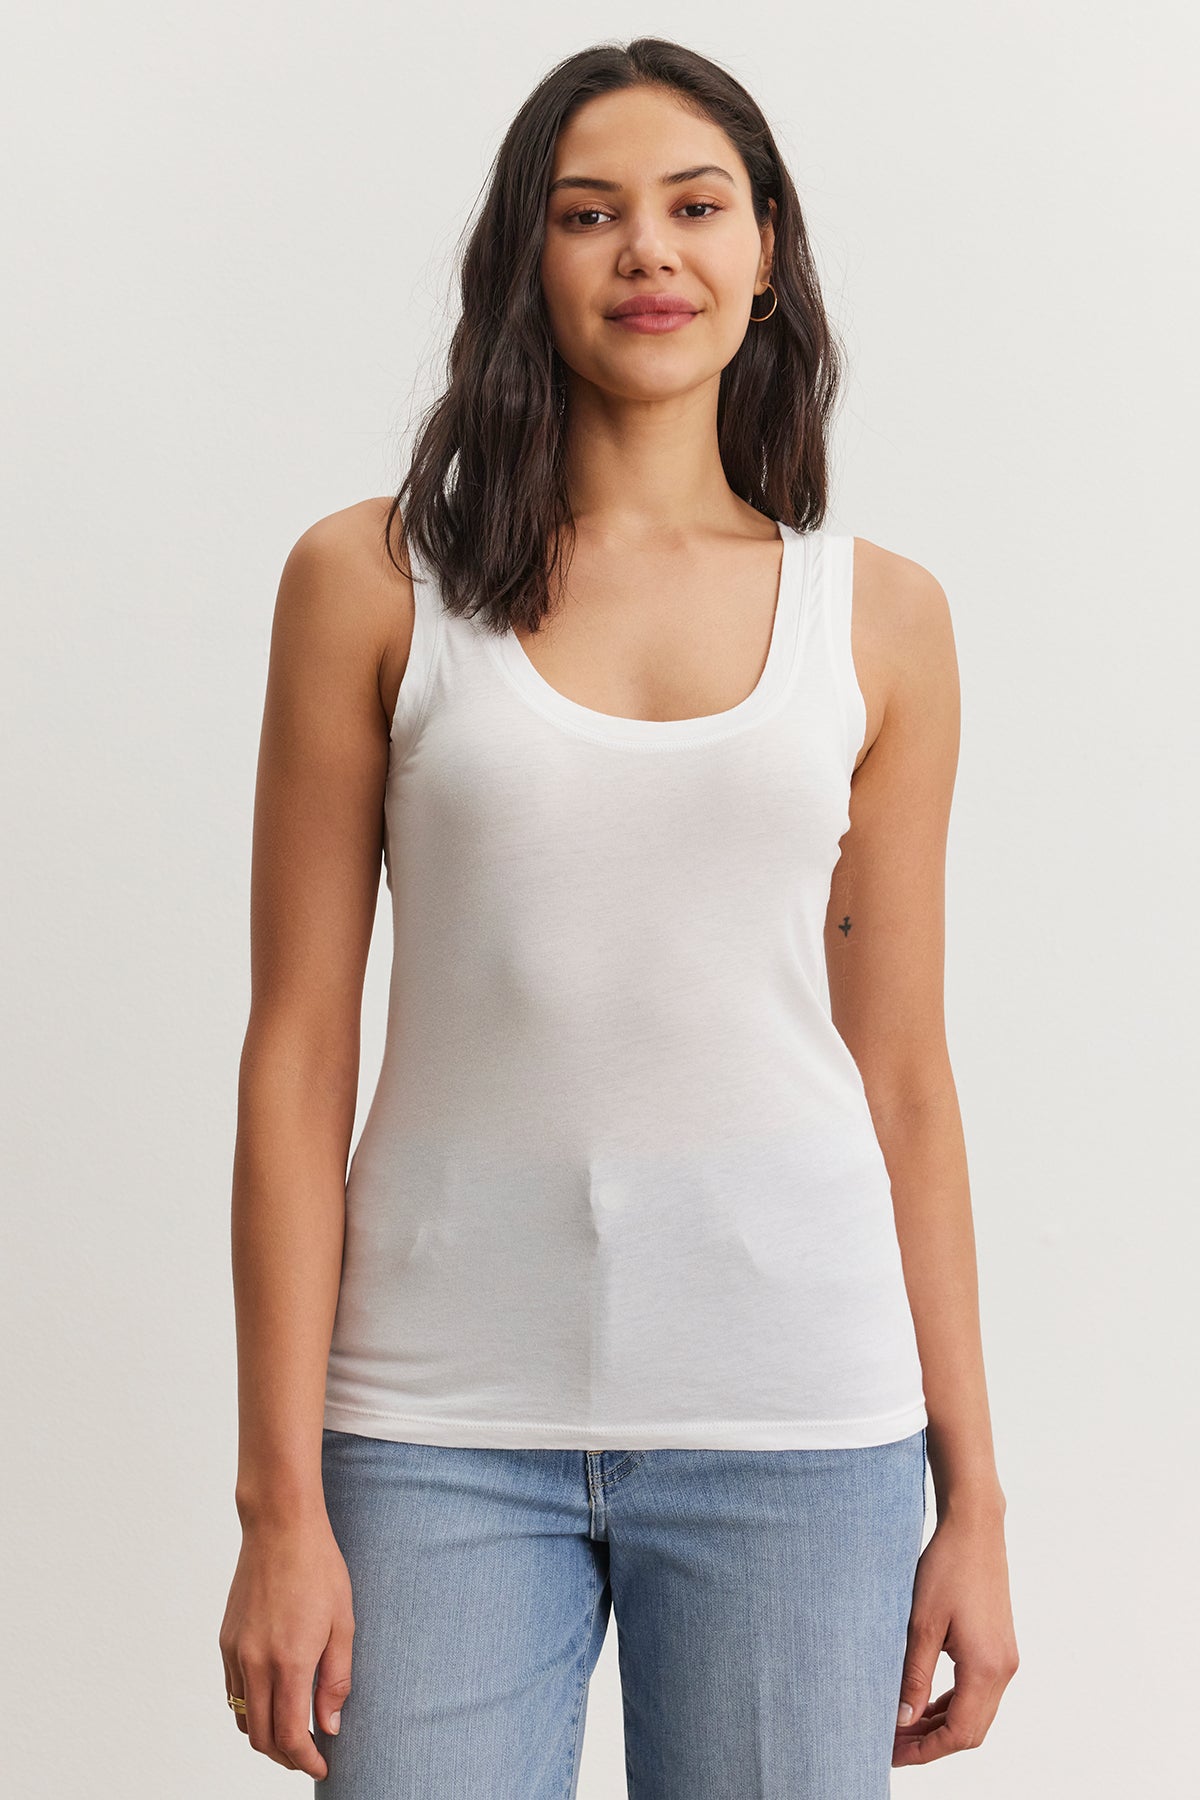 A person with shoulder-length dark hair is standing, wearing a fitted MOSSY TANK TOP by Velvet by Graham & Spencer and blue jeans, showcasing a versatile wardrobe against a plain white background.-36984053104833